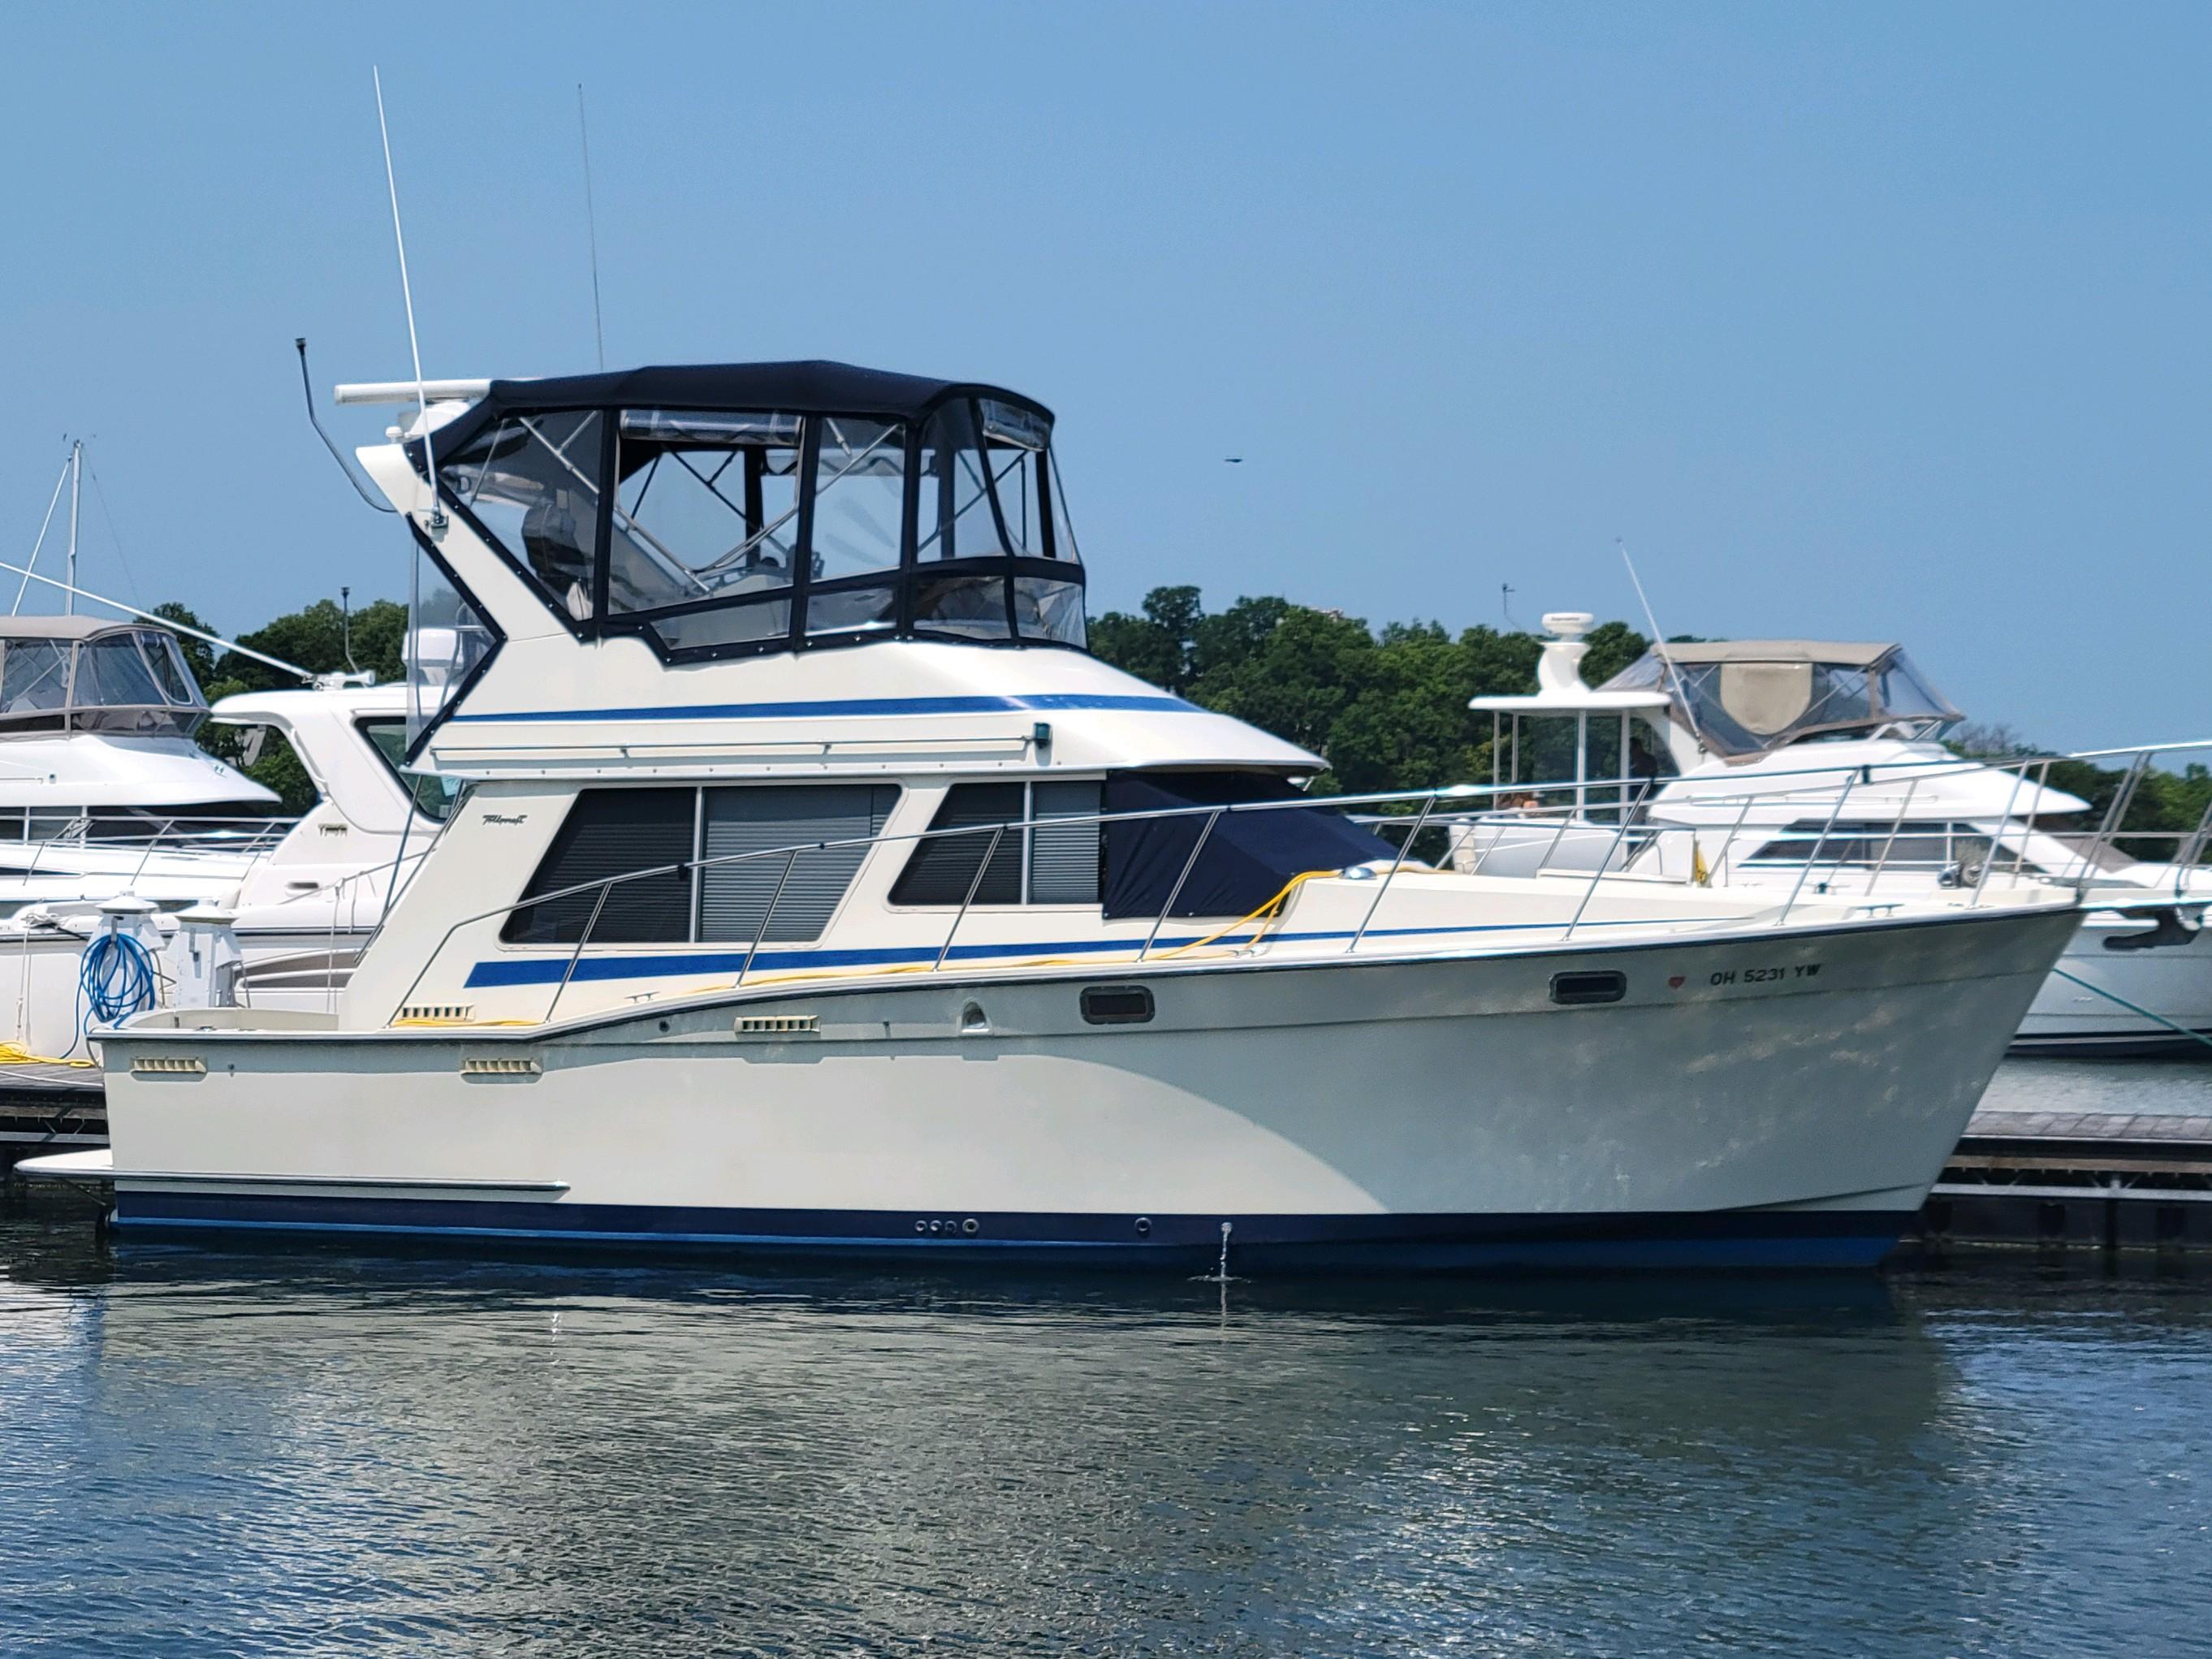 Boats for sale in Ohio - Boat Trader